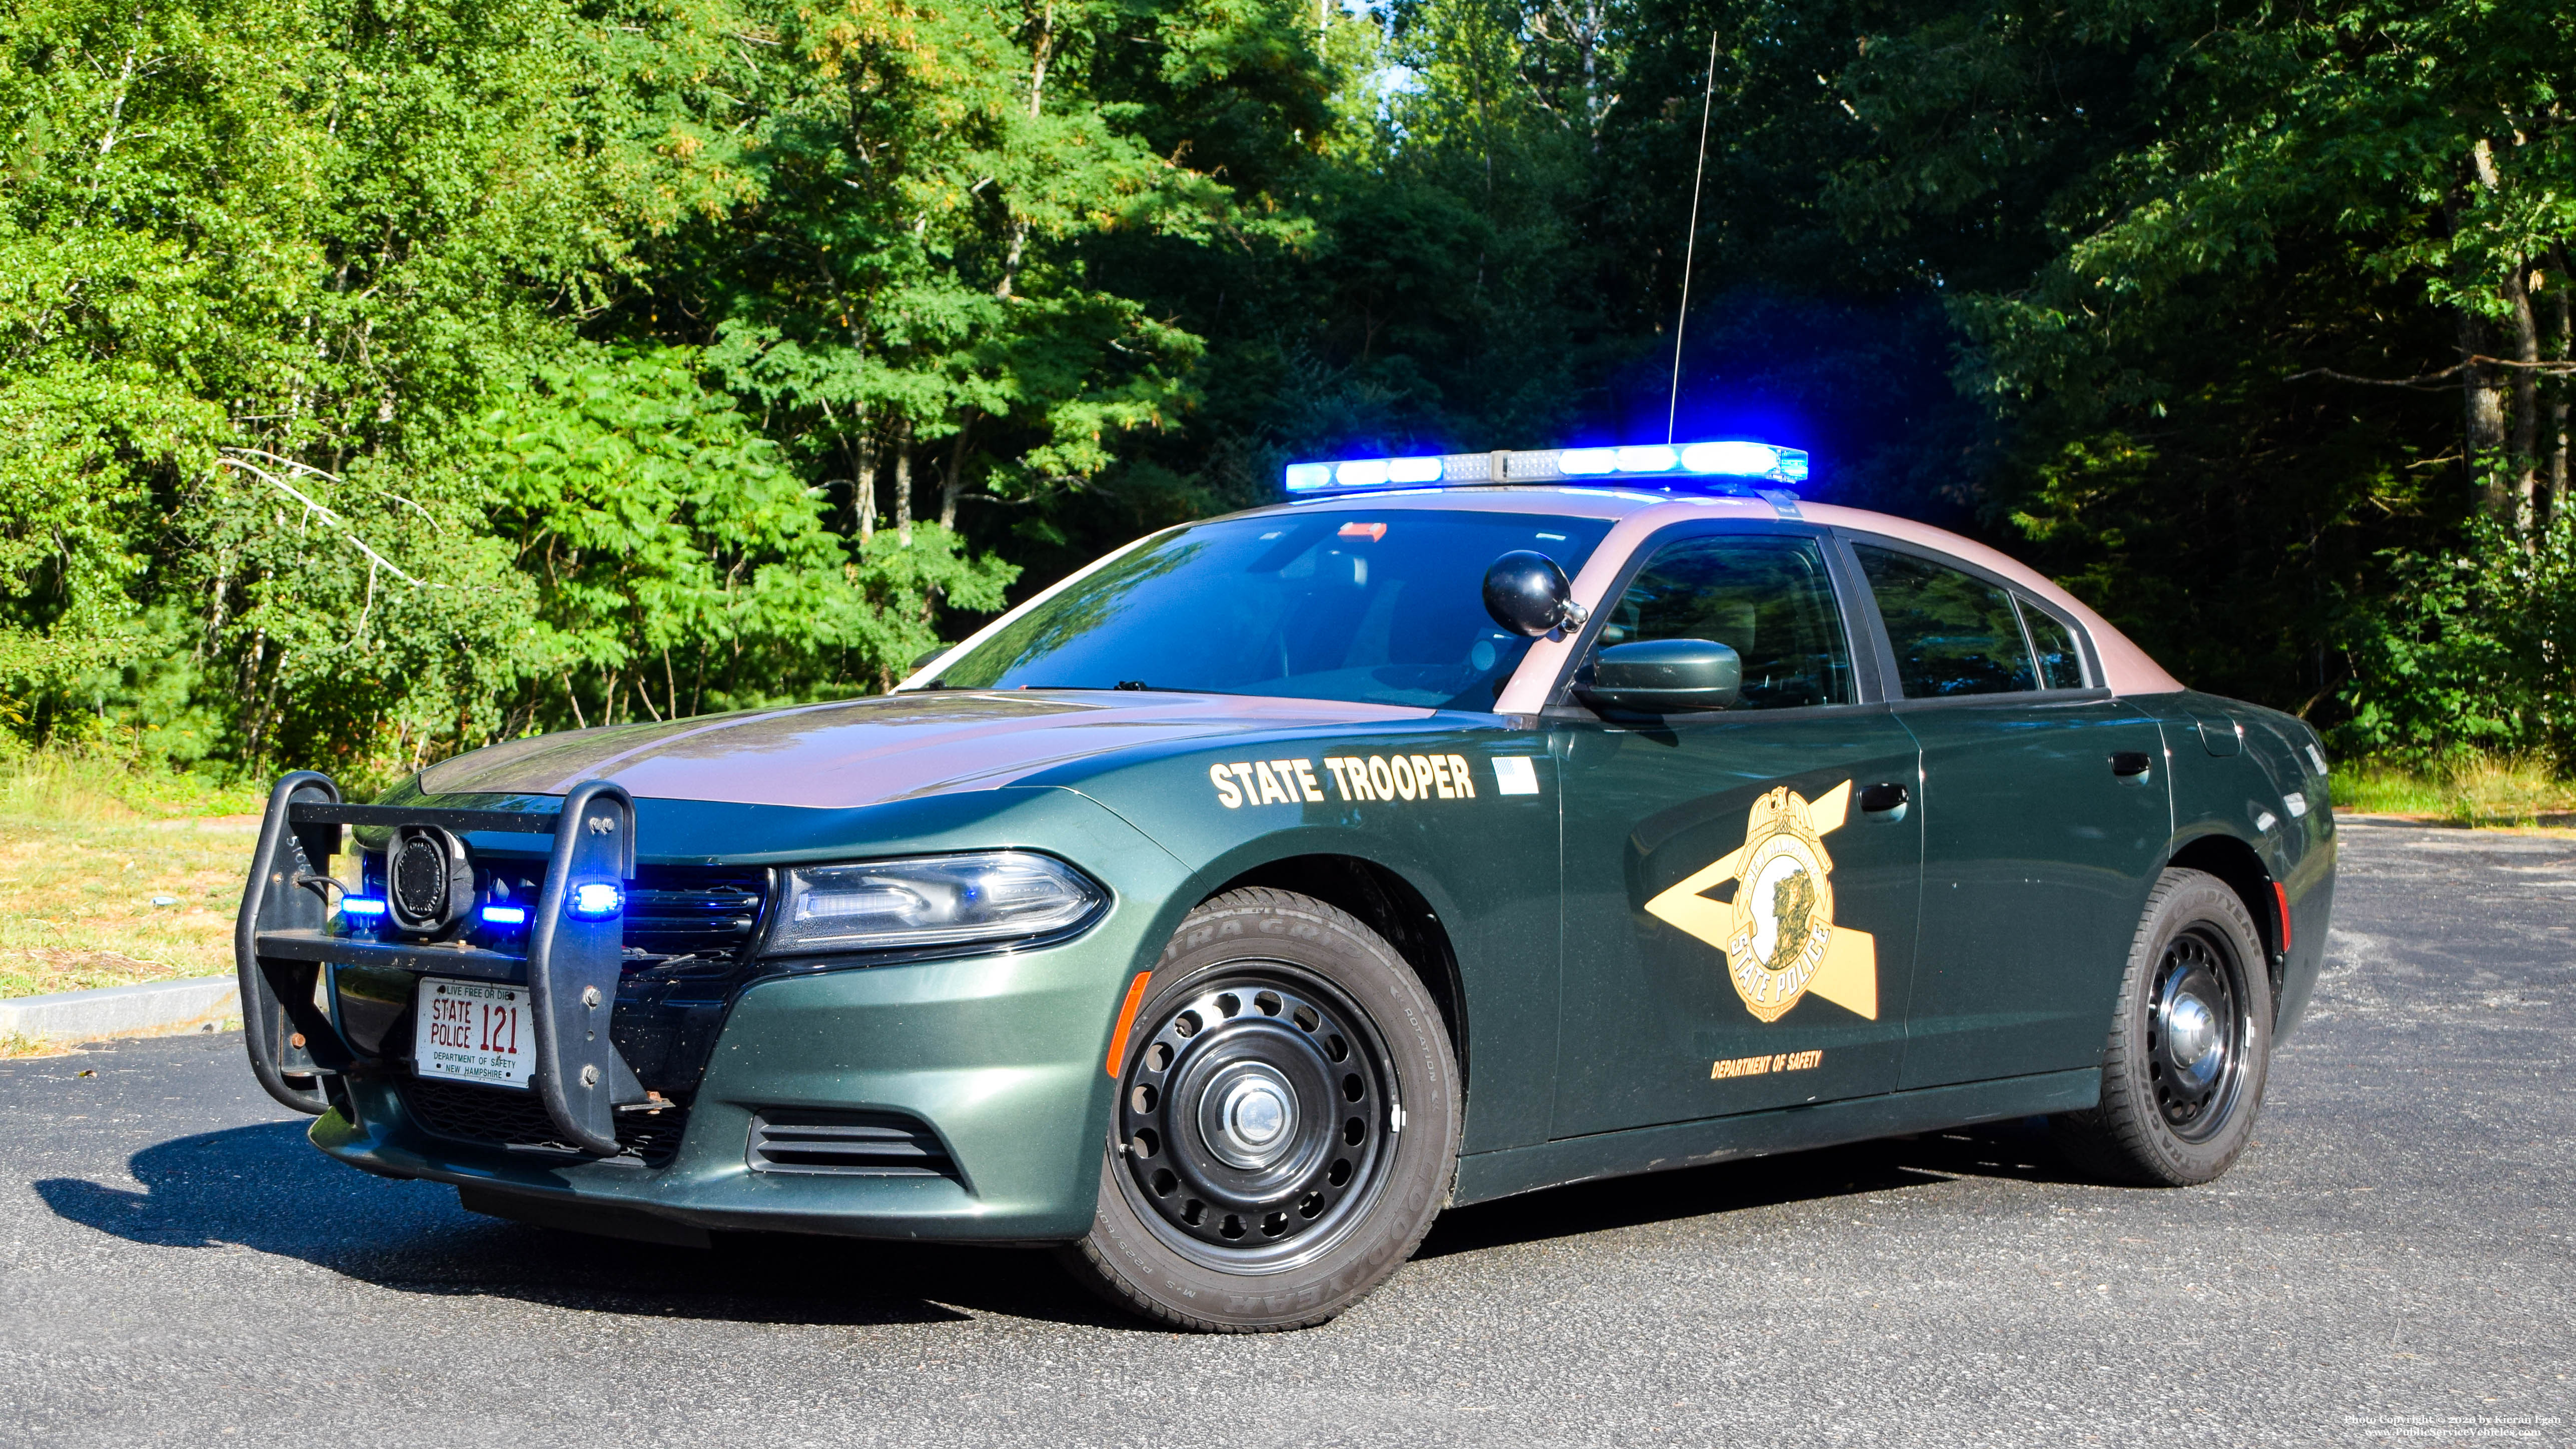 A photo  of New Hampshire State Police
            Cruiser 121, a 2015 Dodge Charger             taken by Kieran Egan